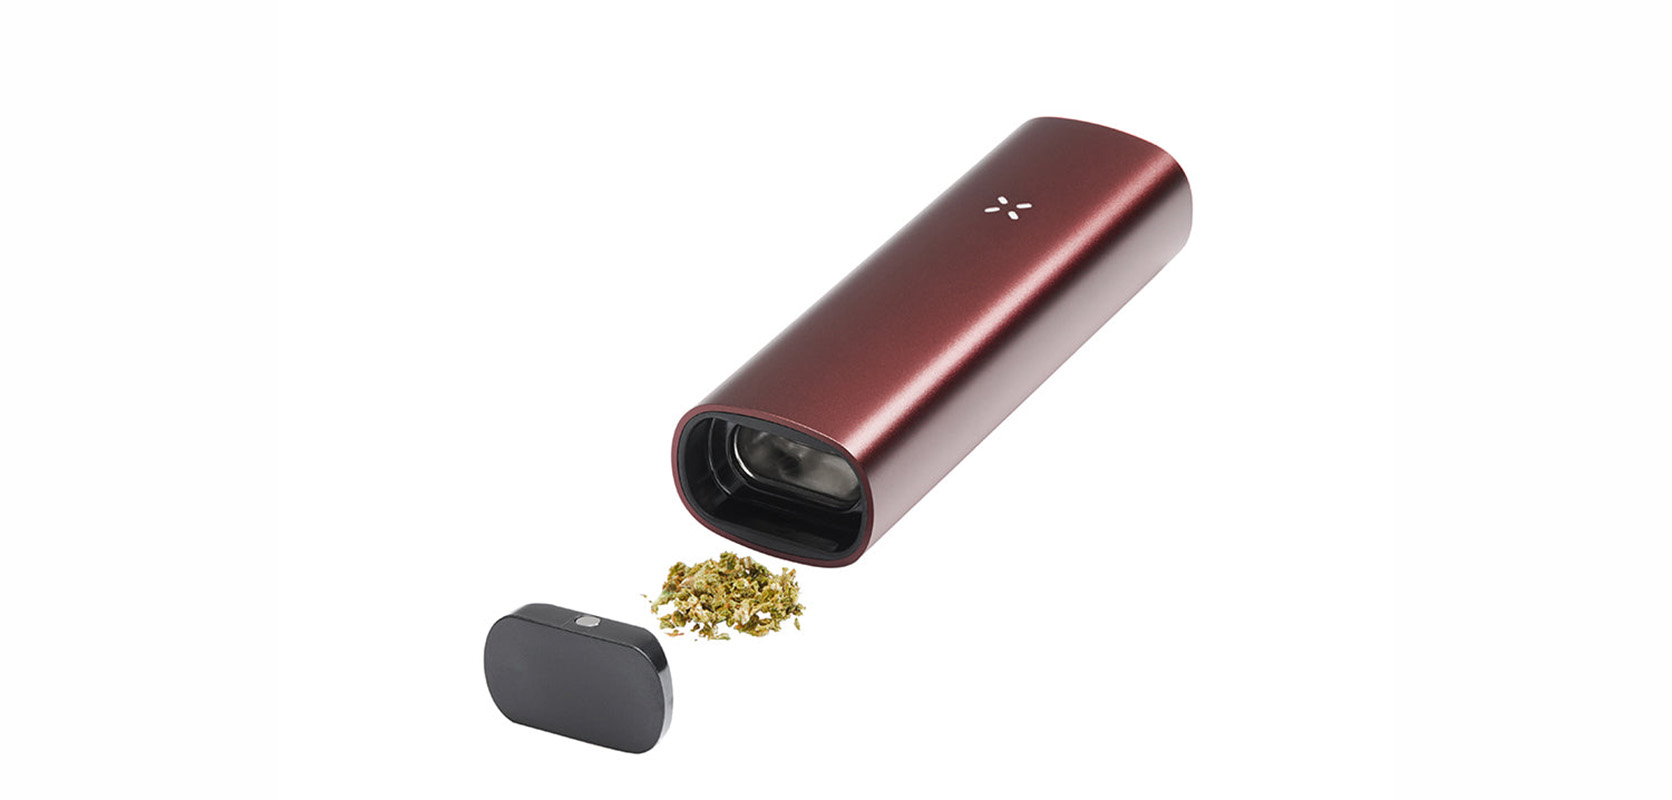 Pax 3 By Pax Labs vape for sale. Buy weed online.